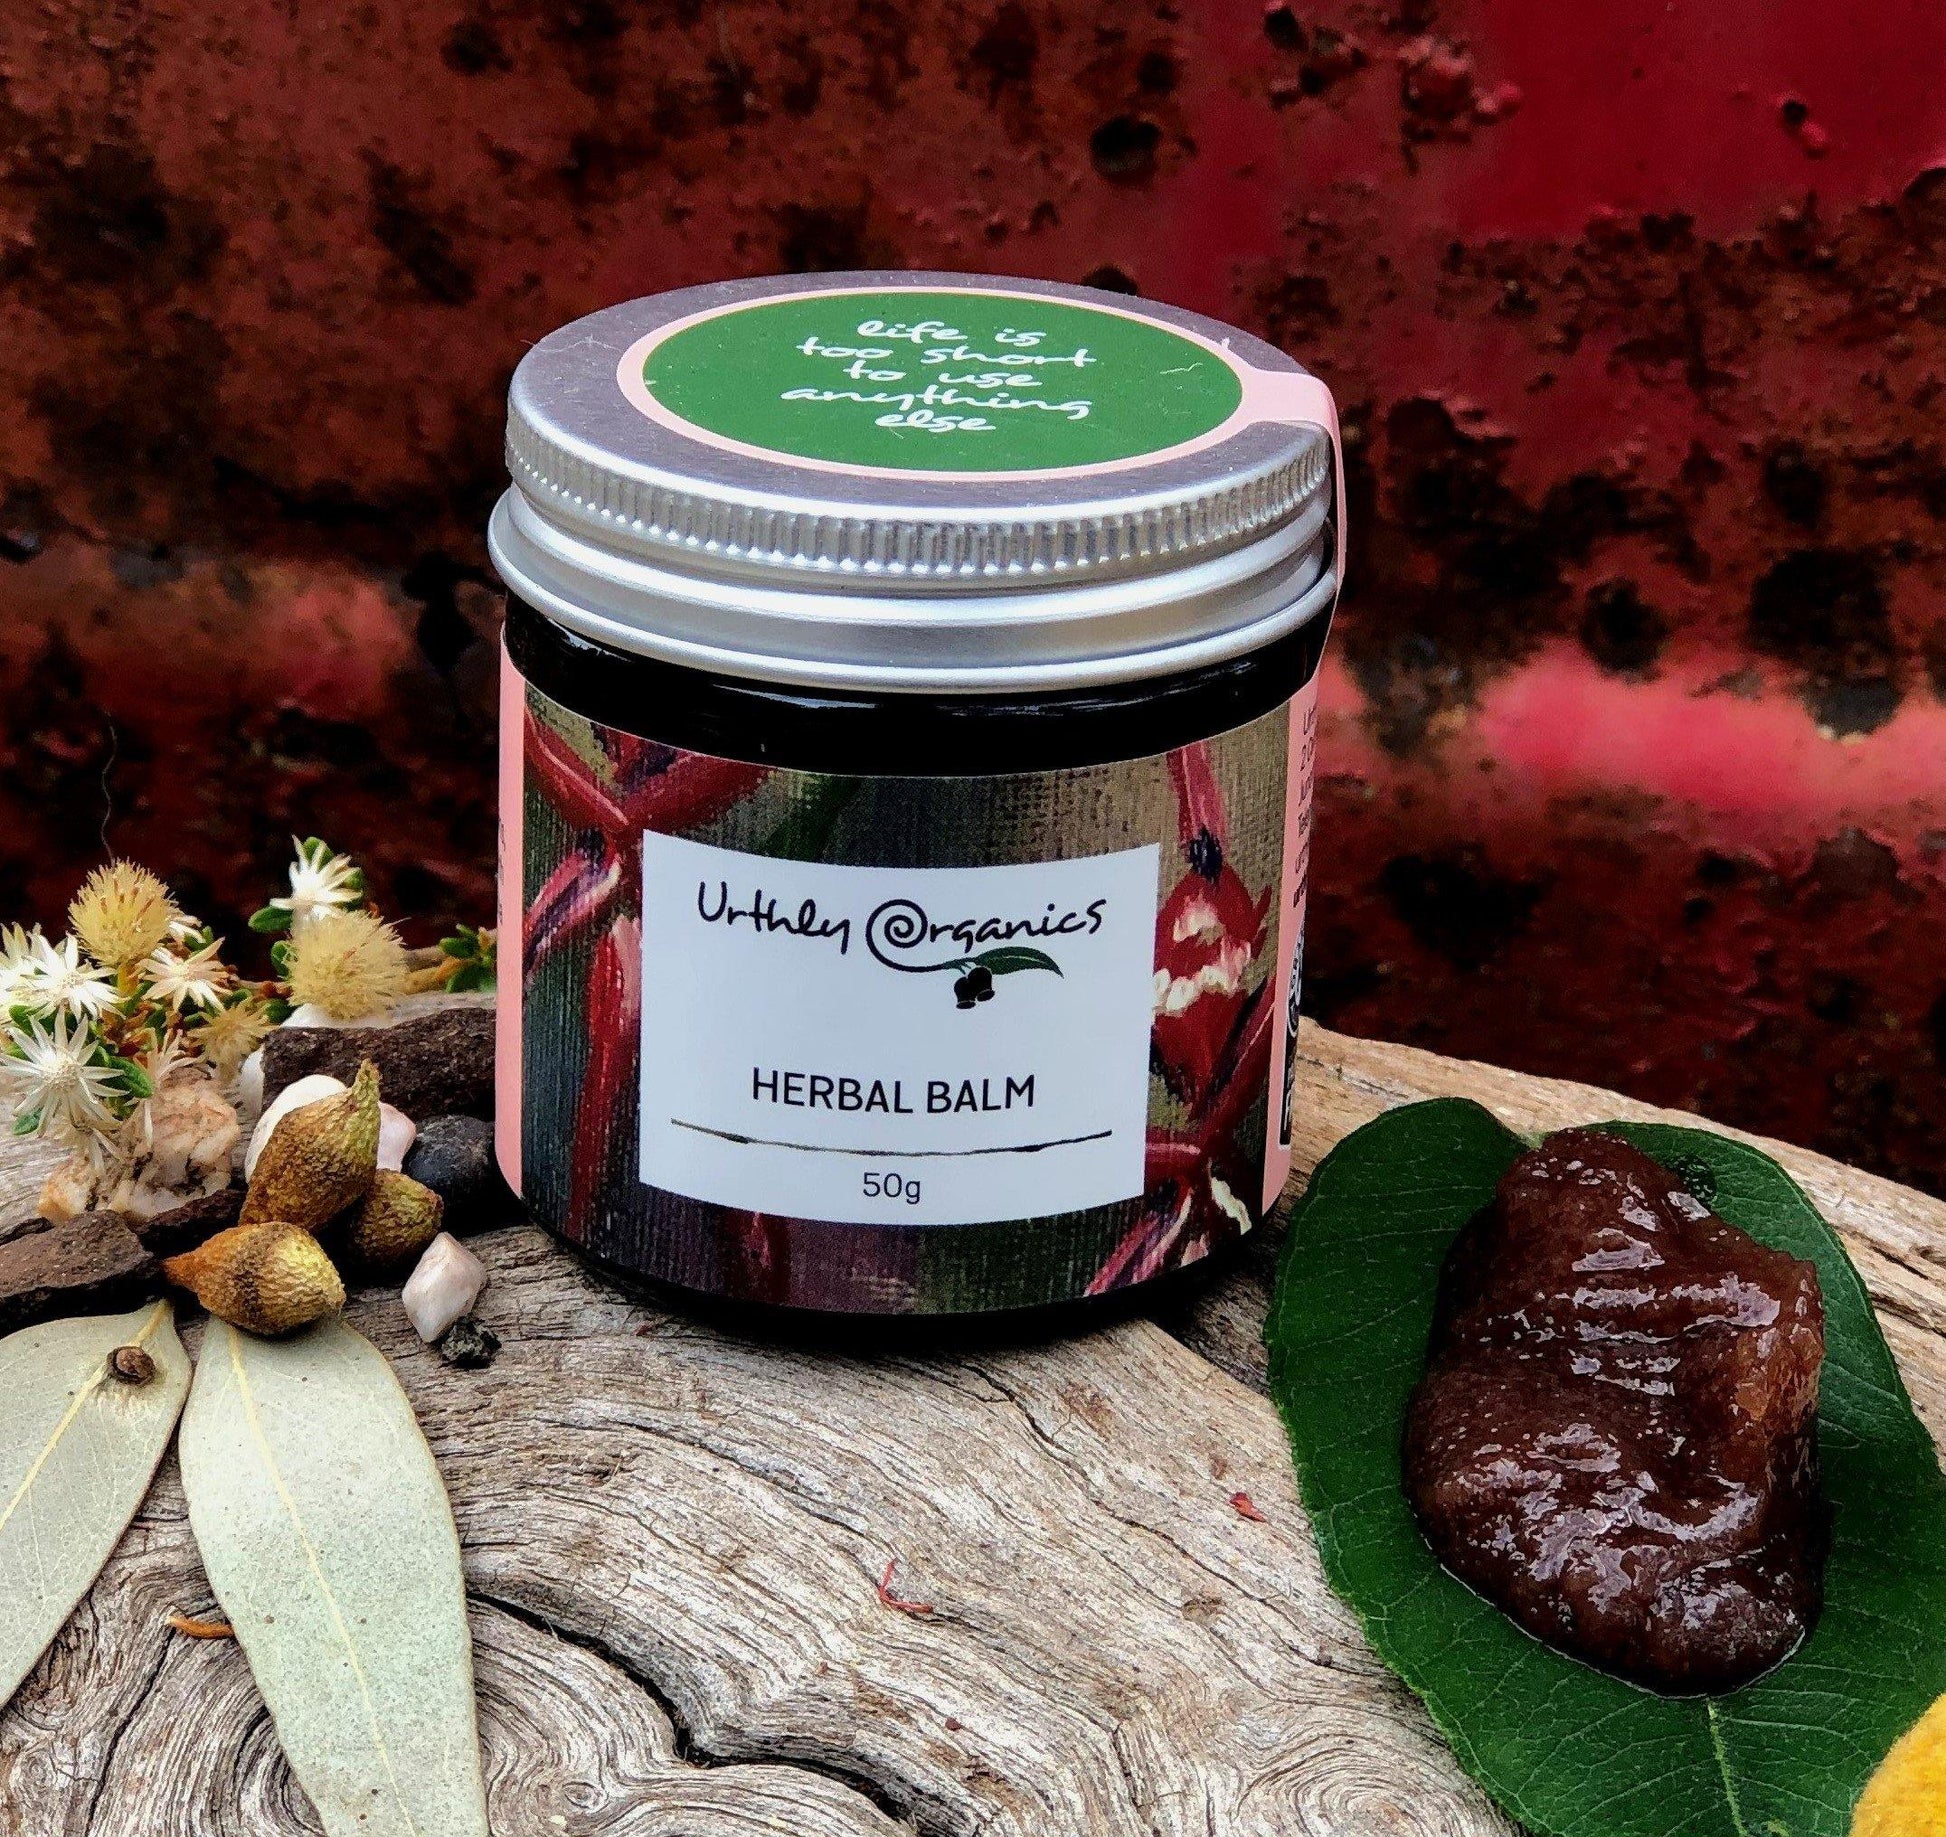 Herbal Balm - UrthlyOrganics Natural ethical skincare and cleaning